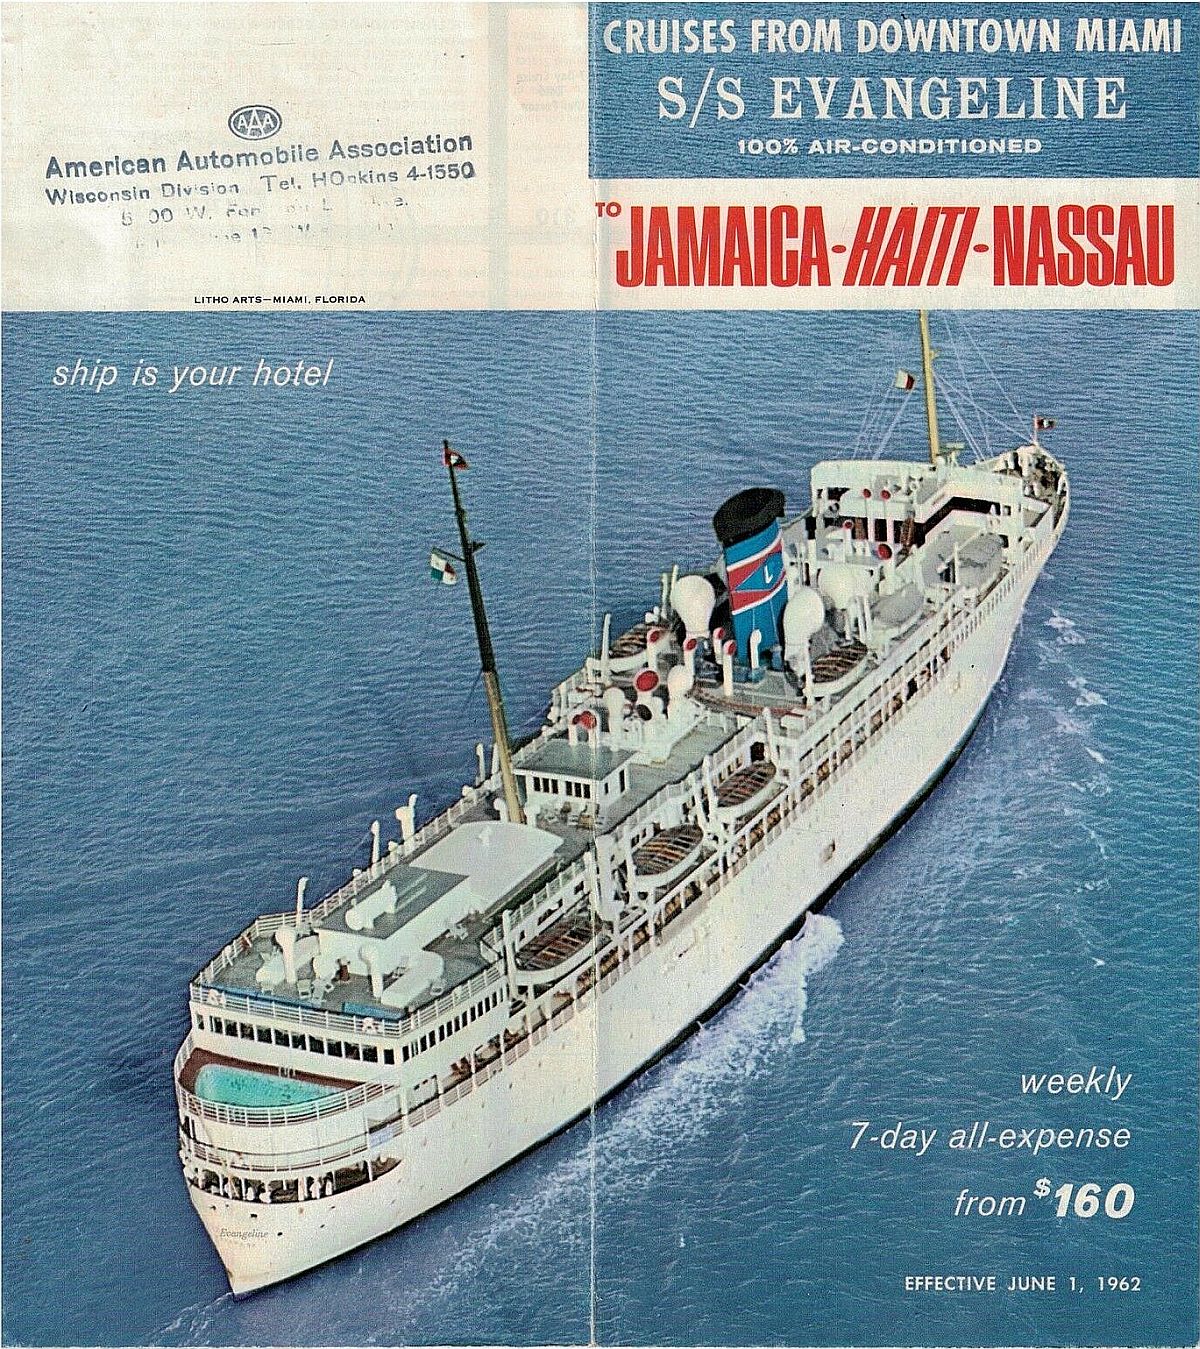 ss Evangeline Brochure effective June 1, 1962: Cruises from downtown Miami